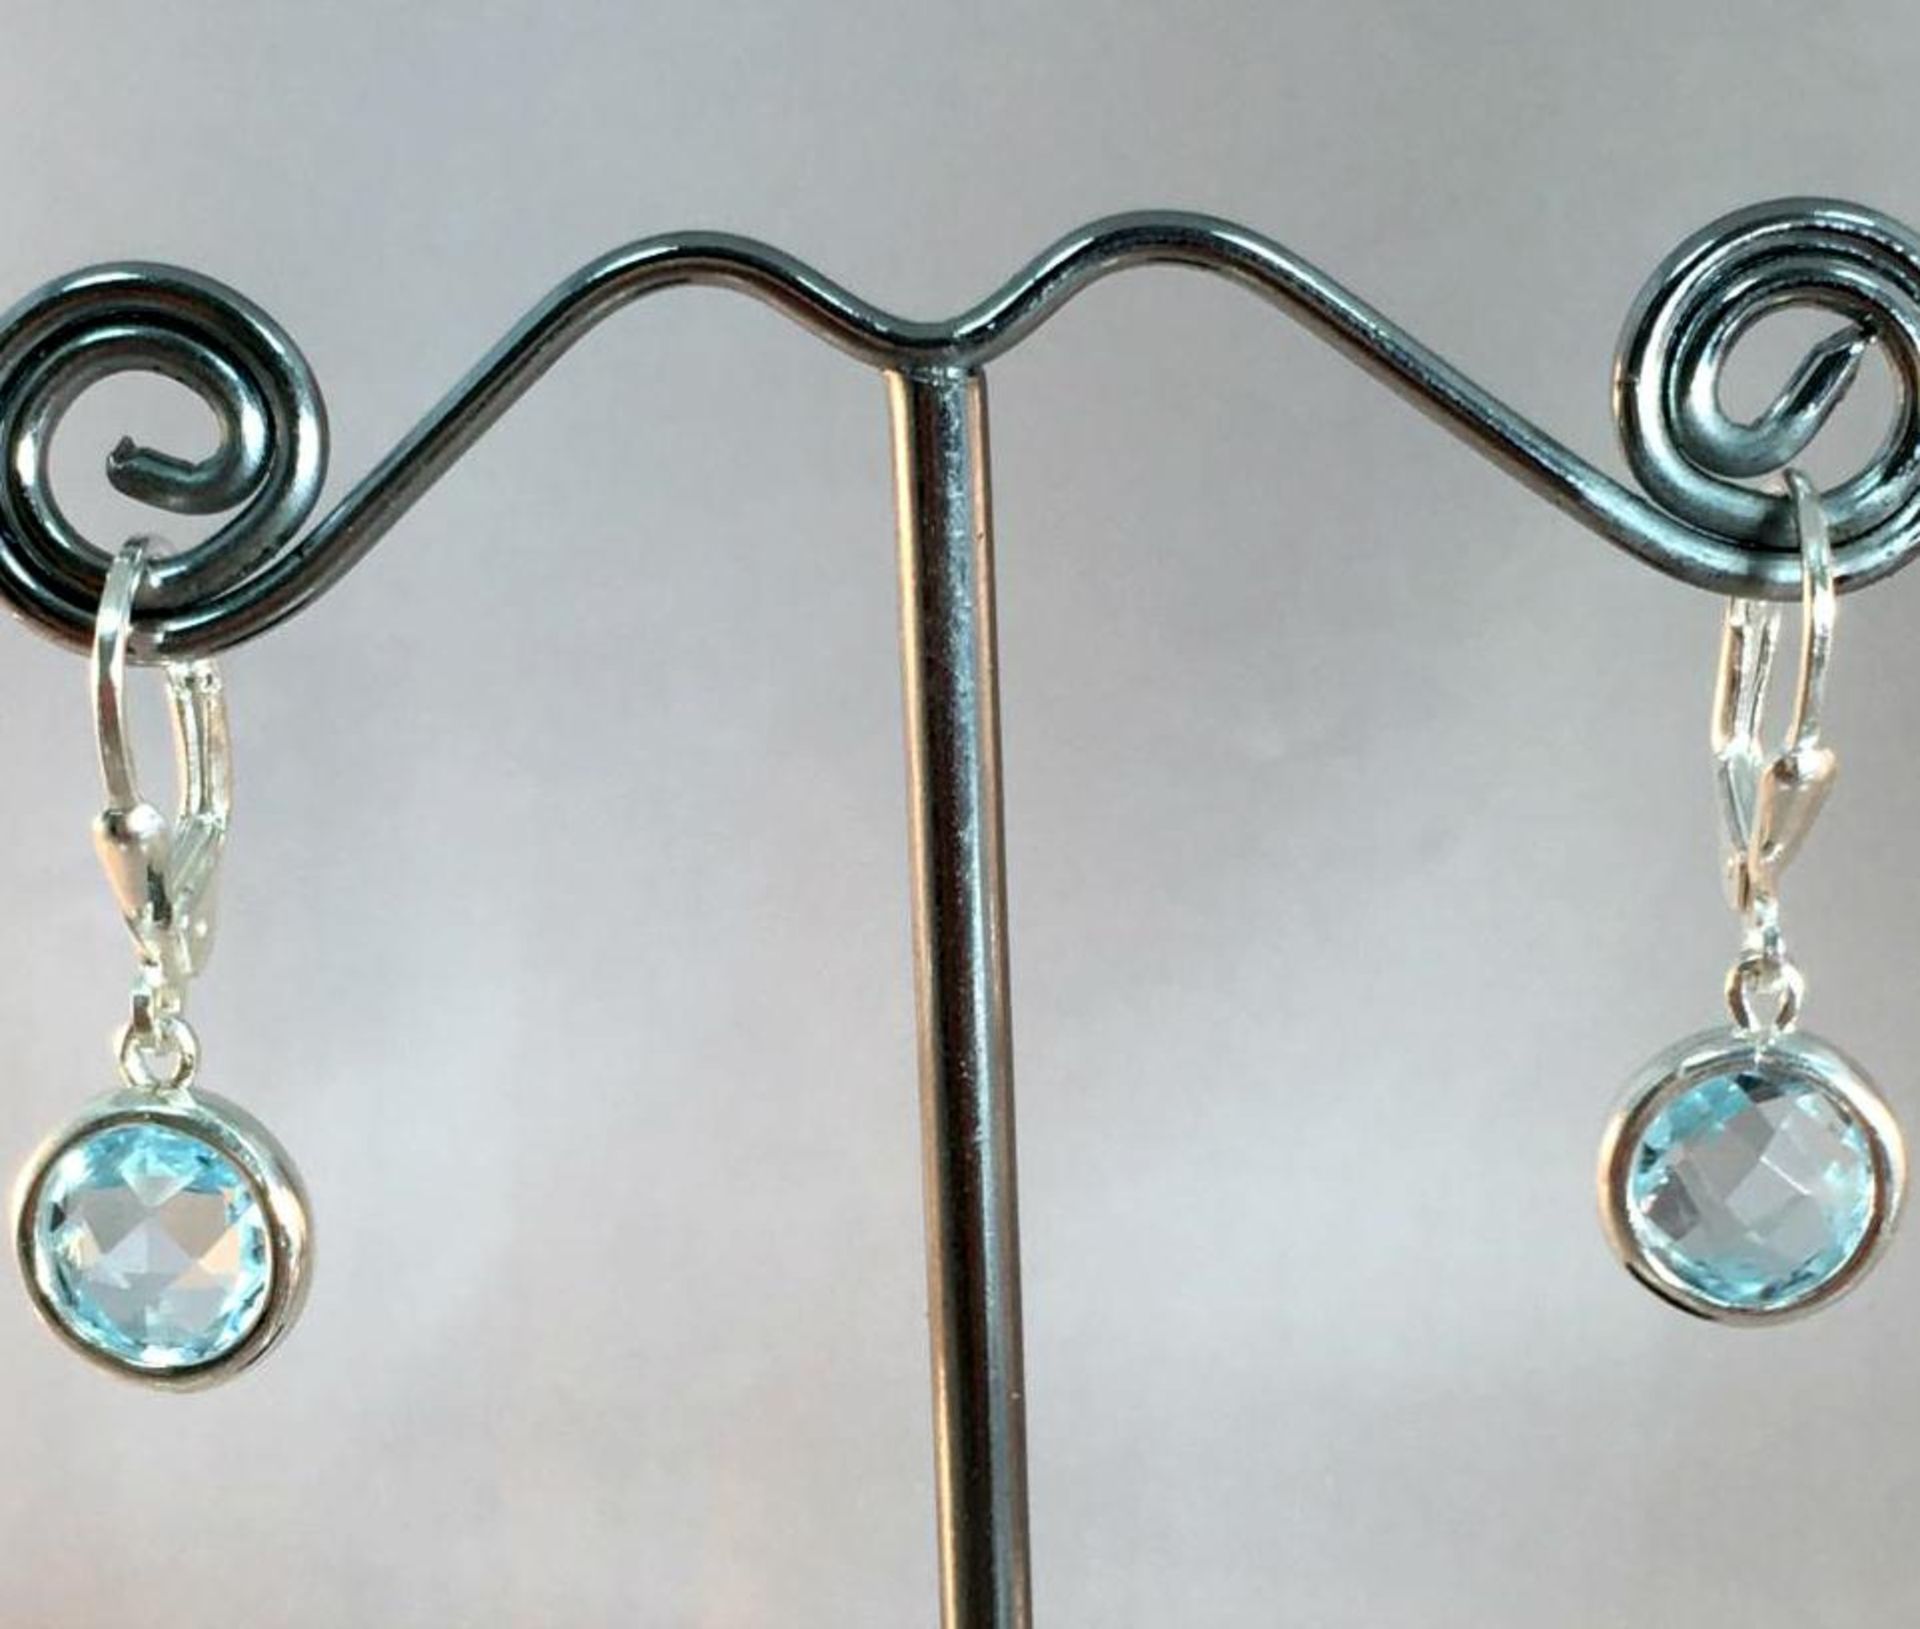 4ct Sky Blue Topaz Earrings with Lever Backs in 925 Silver